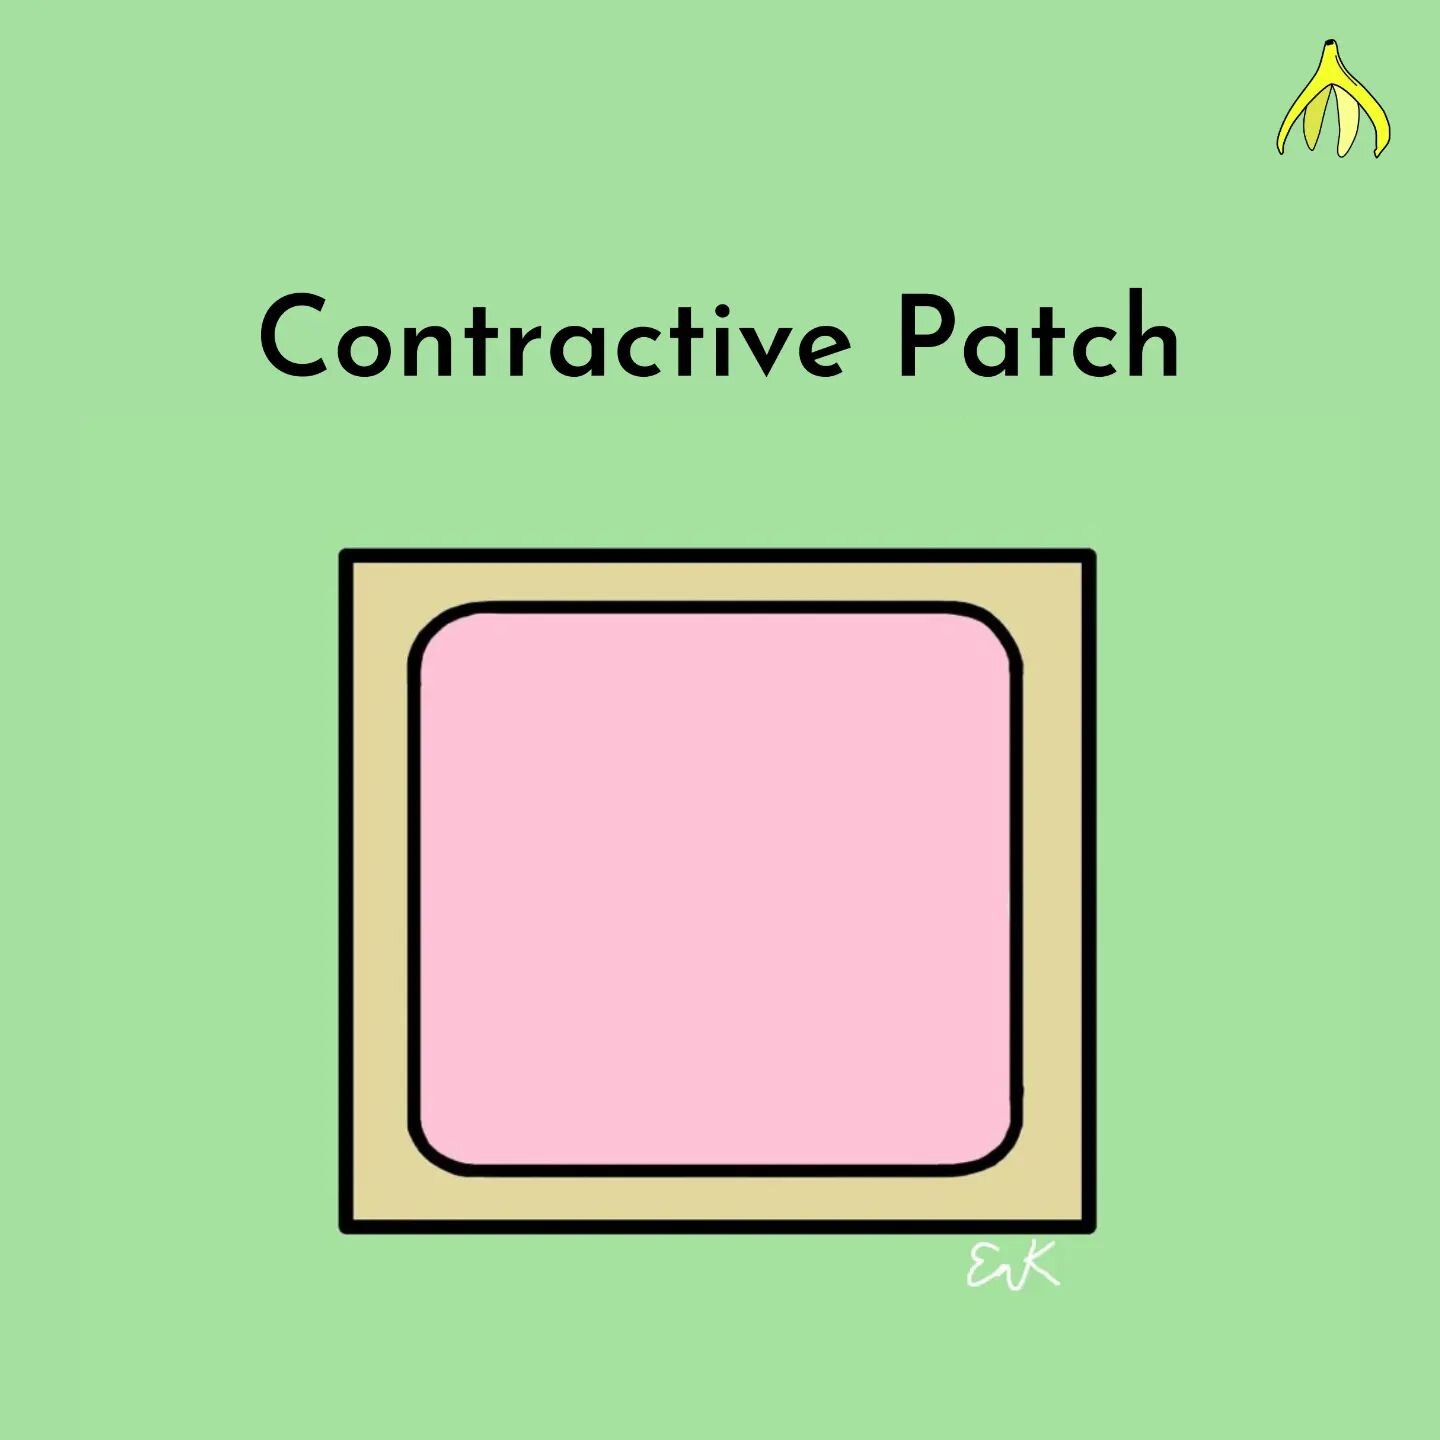 The Contraceptive Patch! 😍 👀

💫 An adhesive patch (like a plaster) that releases progestogen and estrogen
🌟 Over 99% effective
💫 Can make periods lighter, less painful, and more regular
🌟 Can be stuck to most places on your body
🌟 You can wear